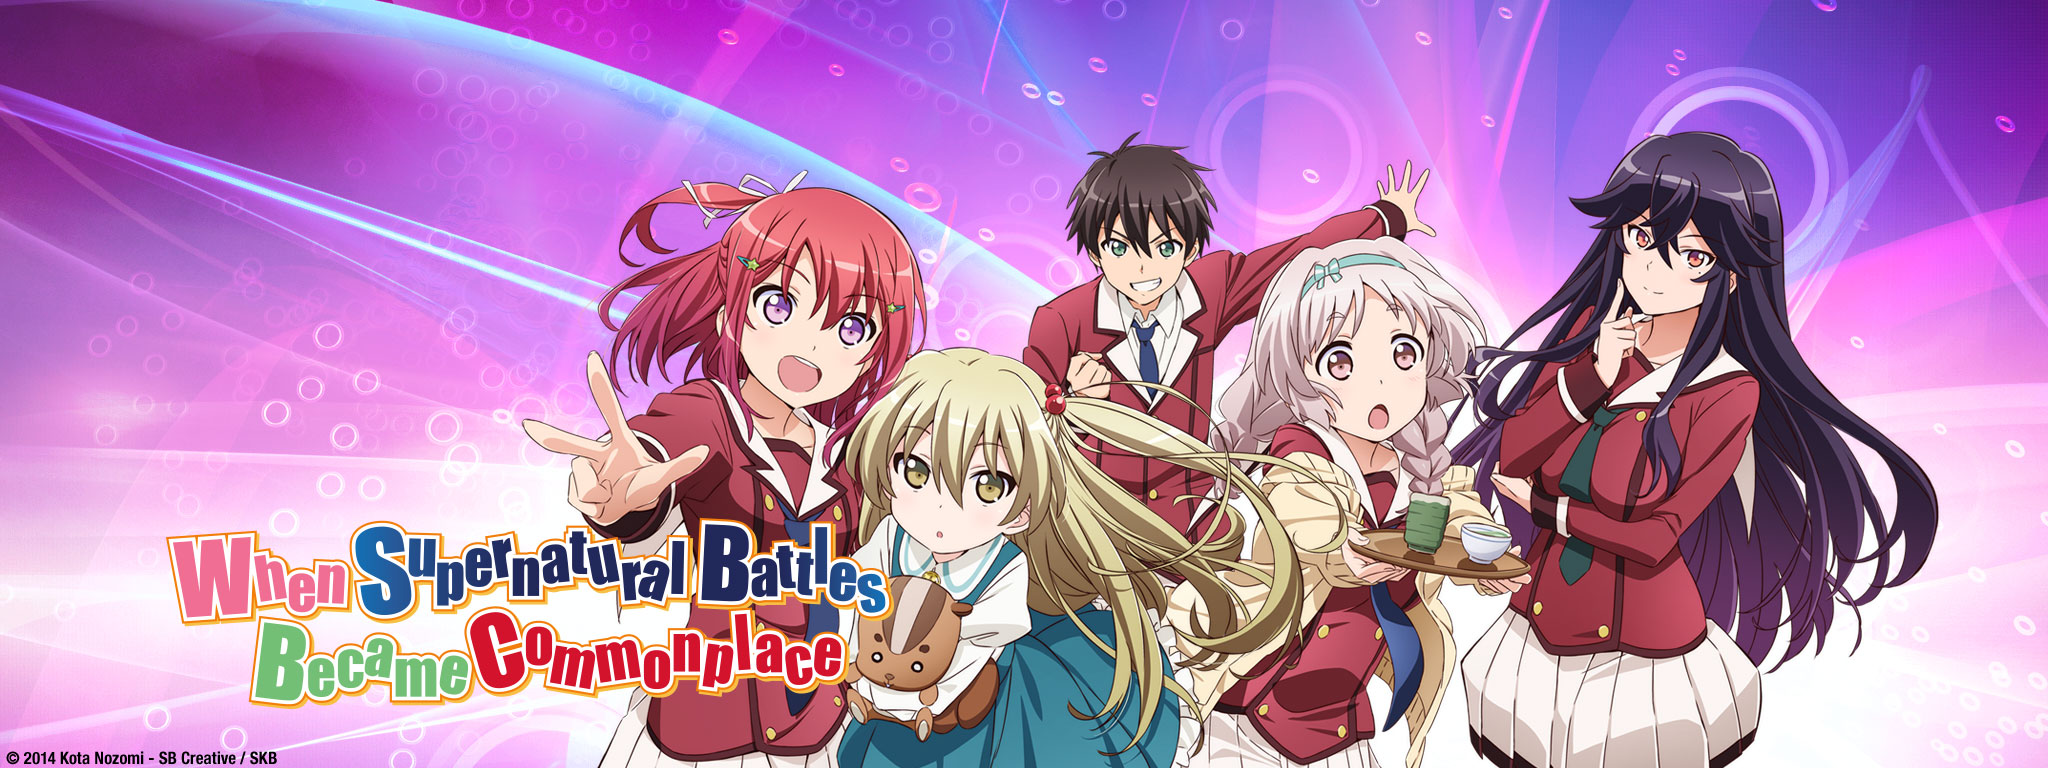 Title Art for When Supernatural Battles Became Commonplace